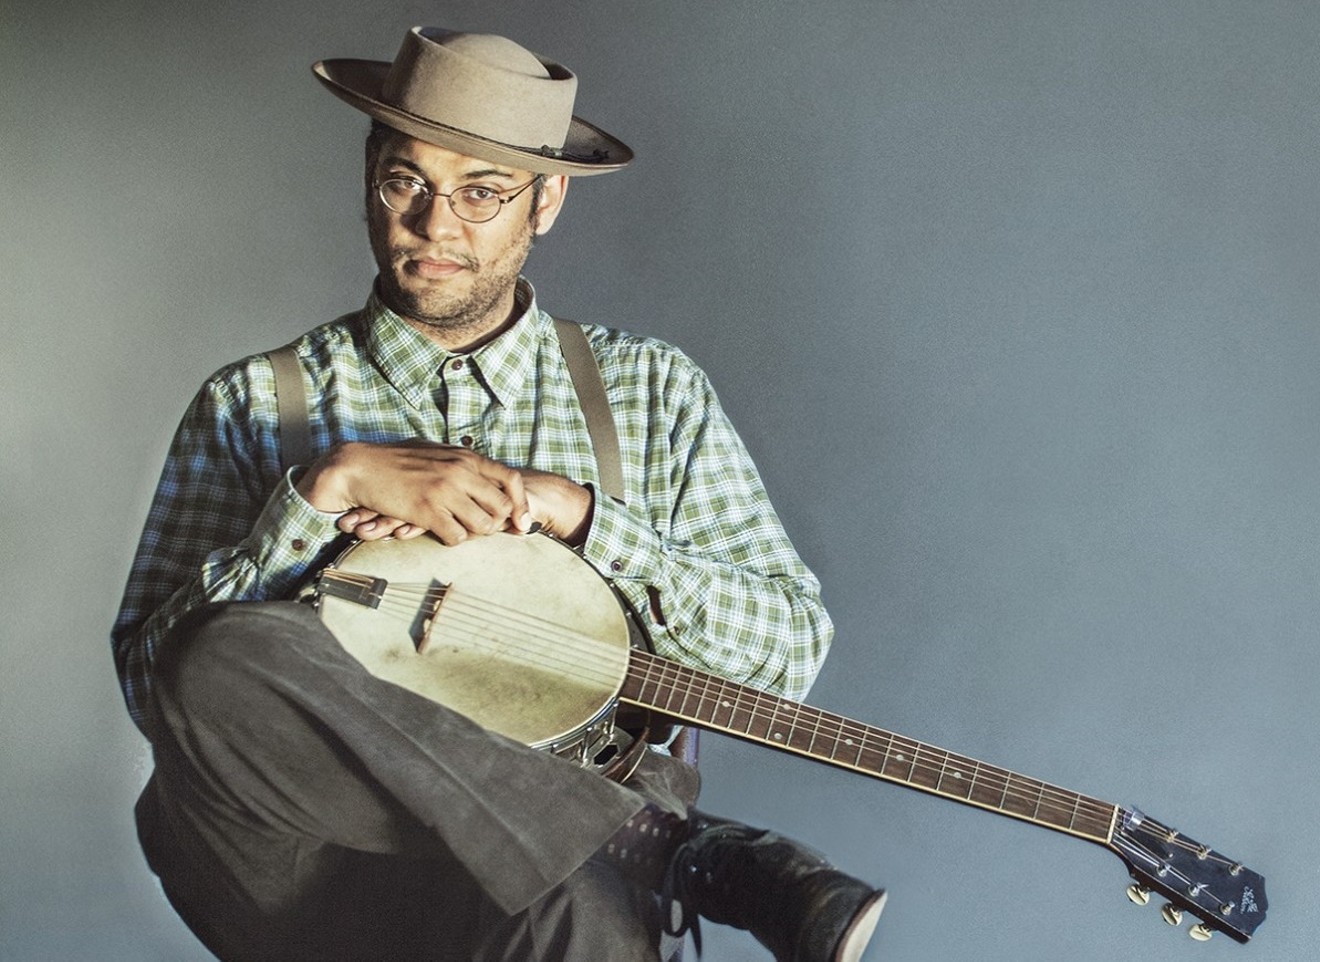 Folk/Americana artist Dom Flemons, who was raised in the Valley.